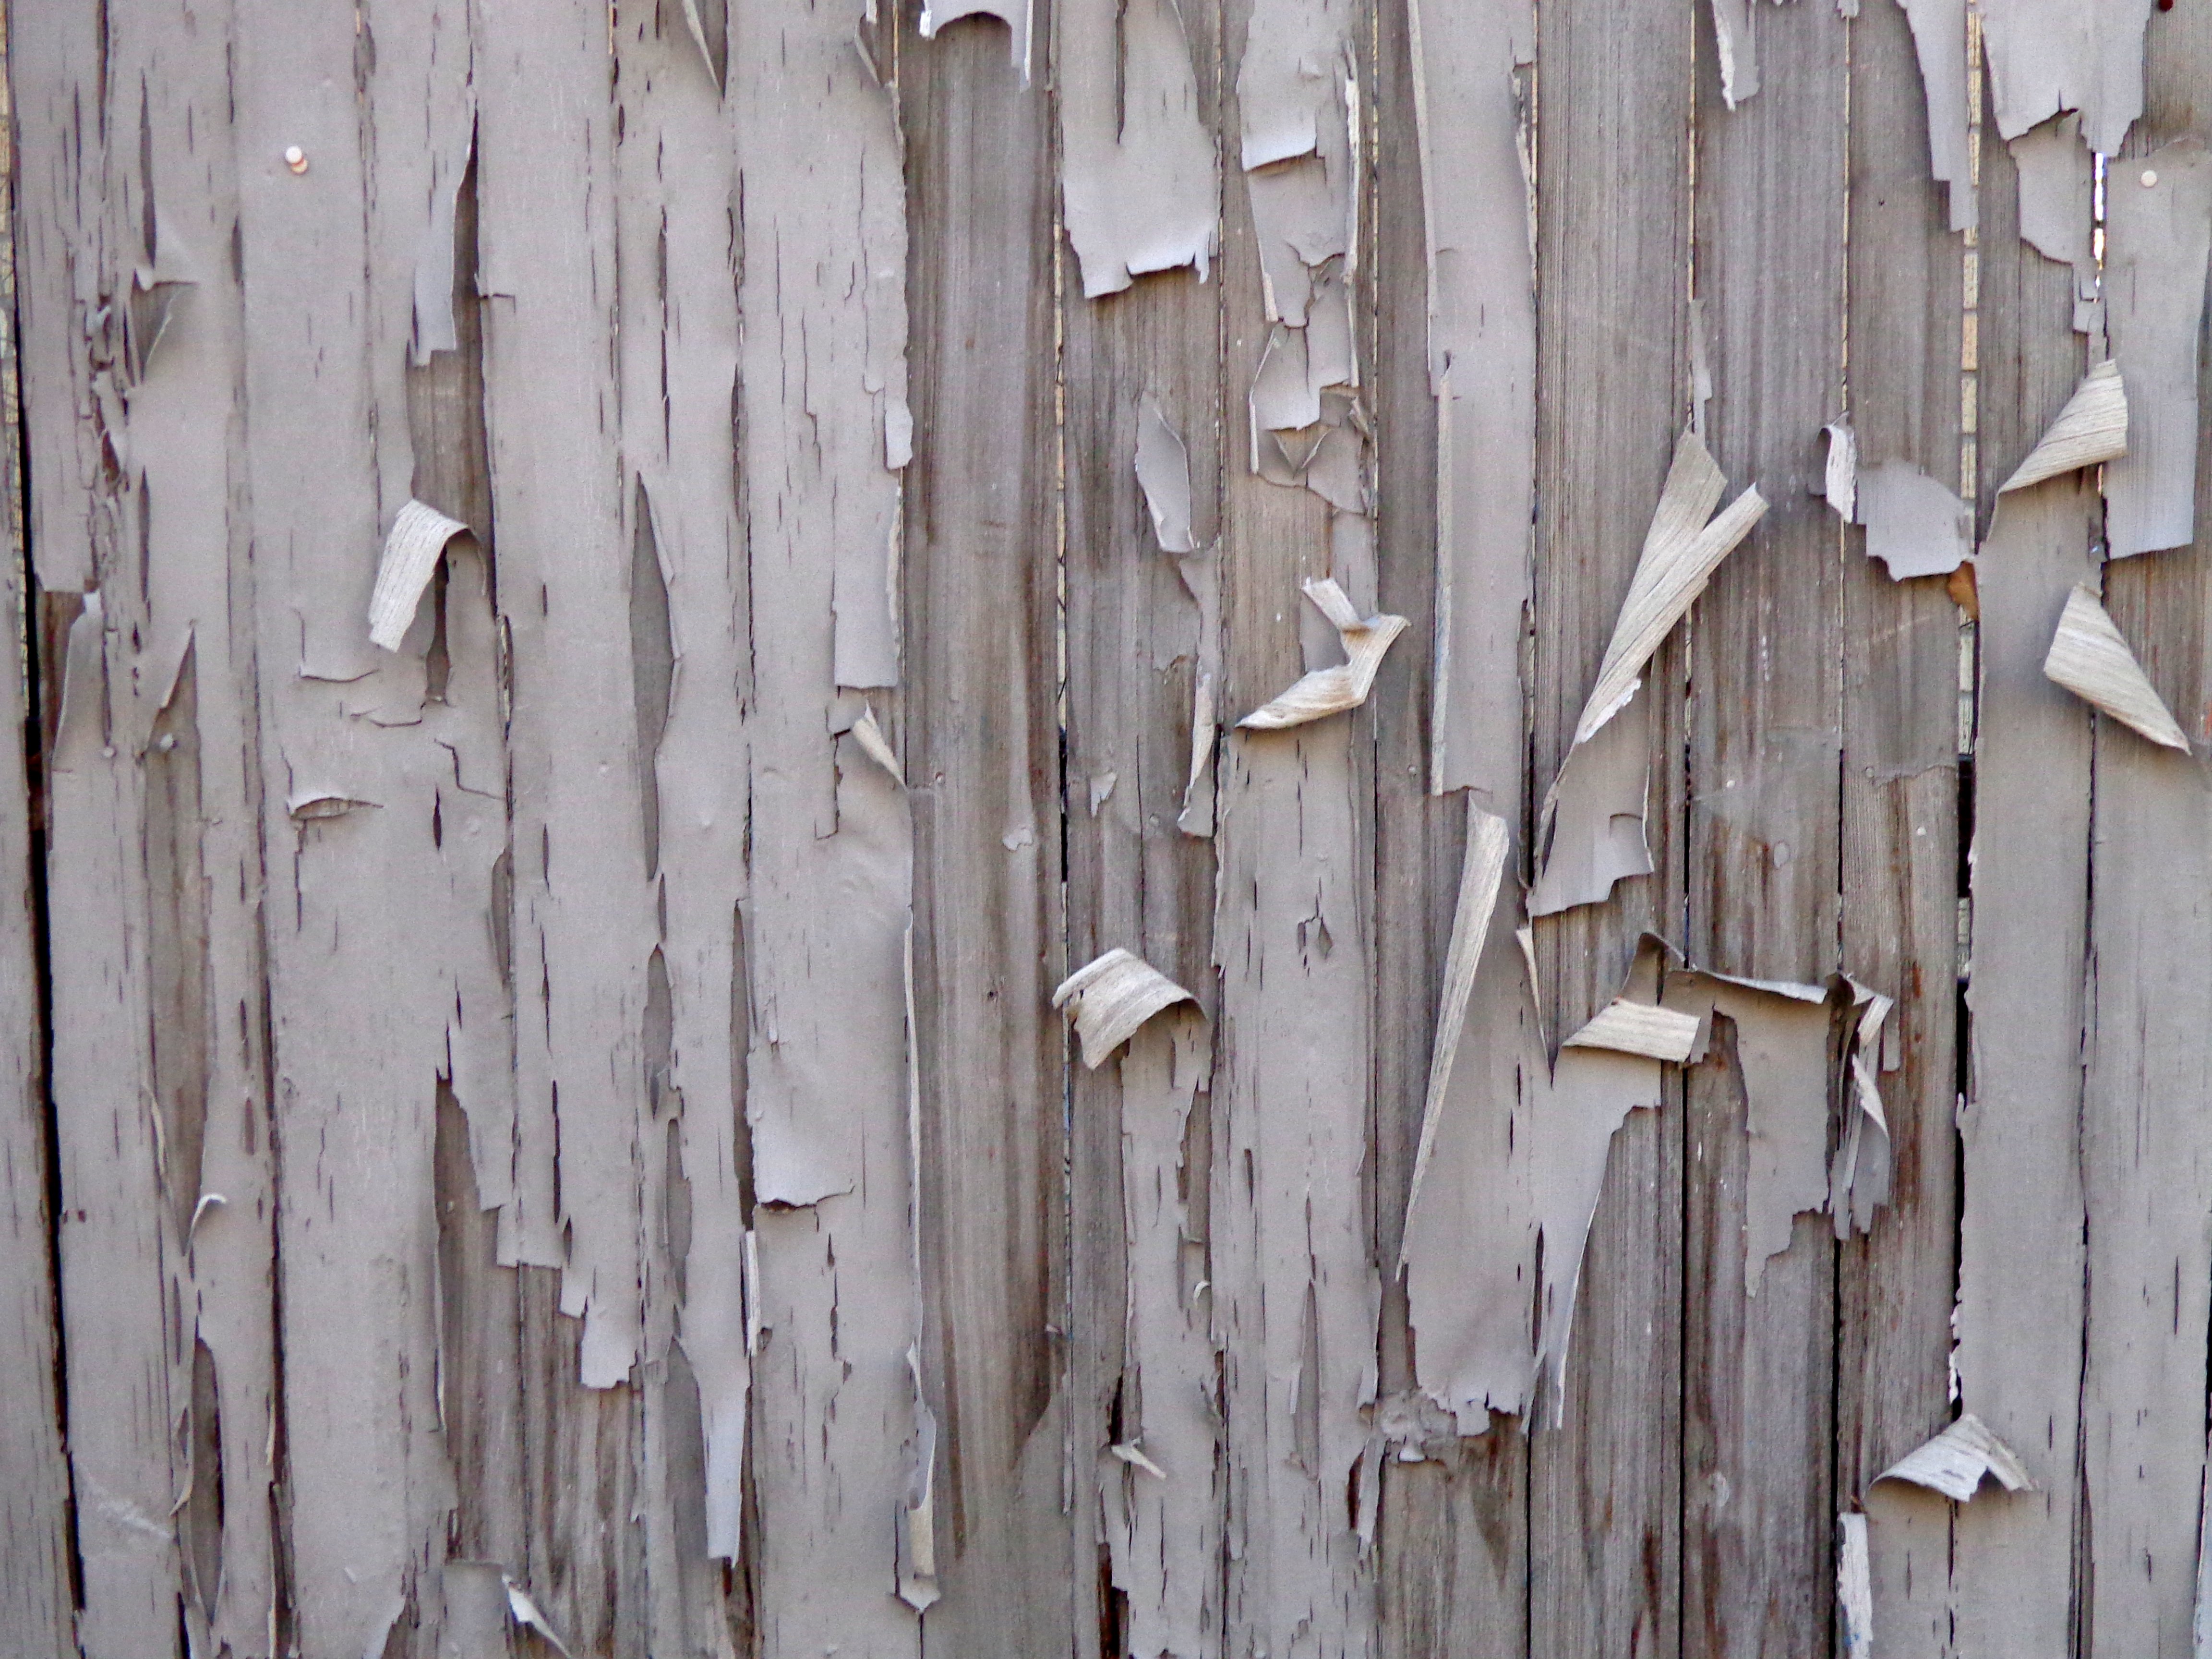 Peeling Paint on Fence Boards Texture Picture | Free Photograph | Photos  Public Domain